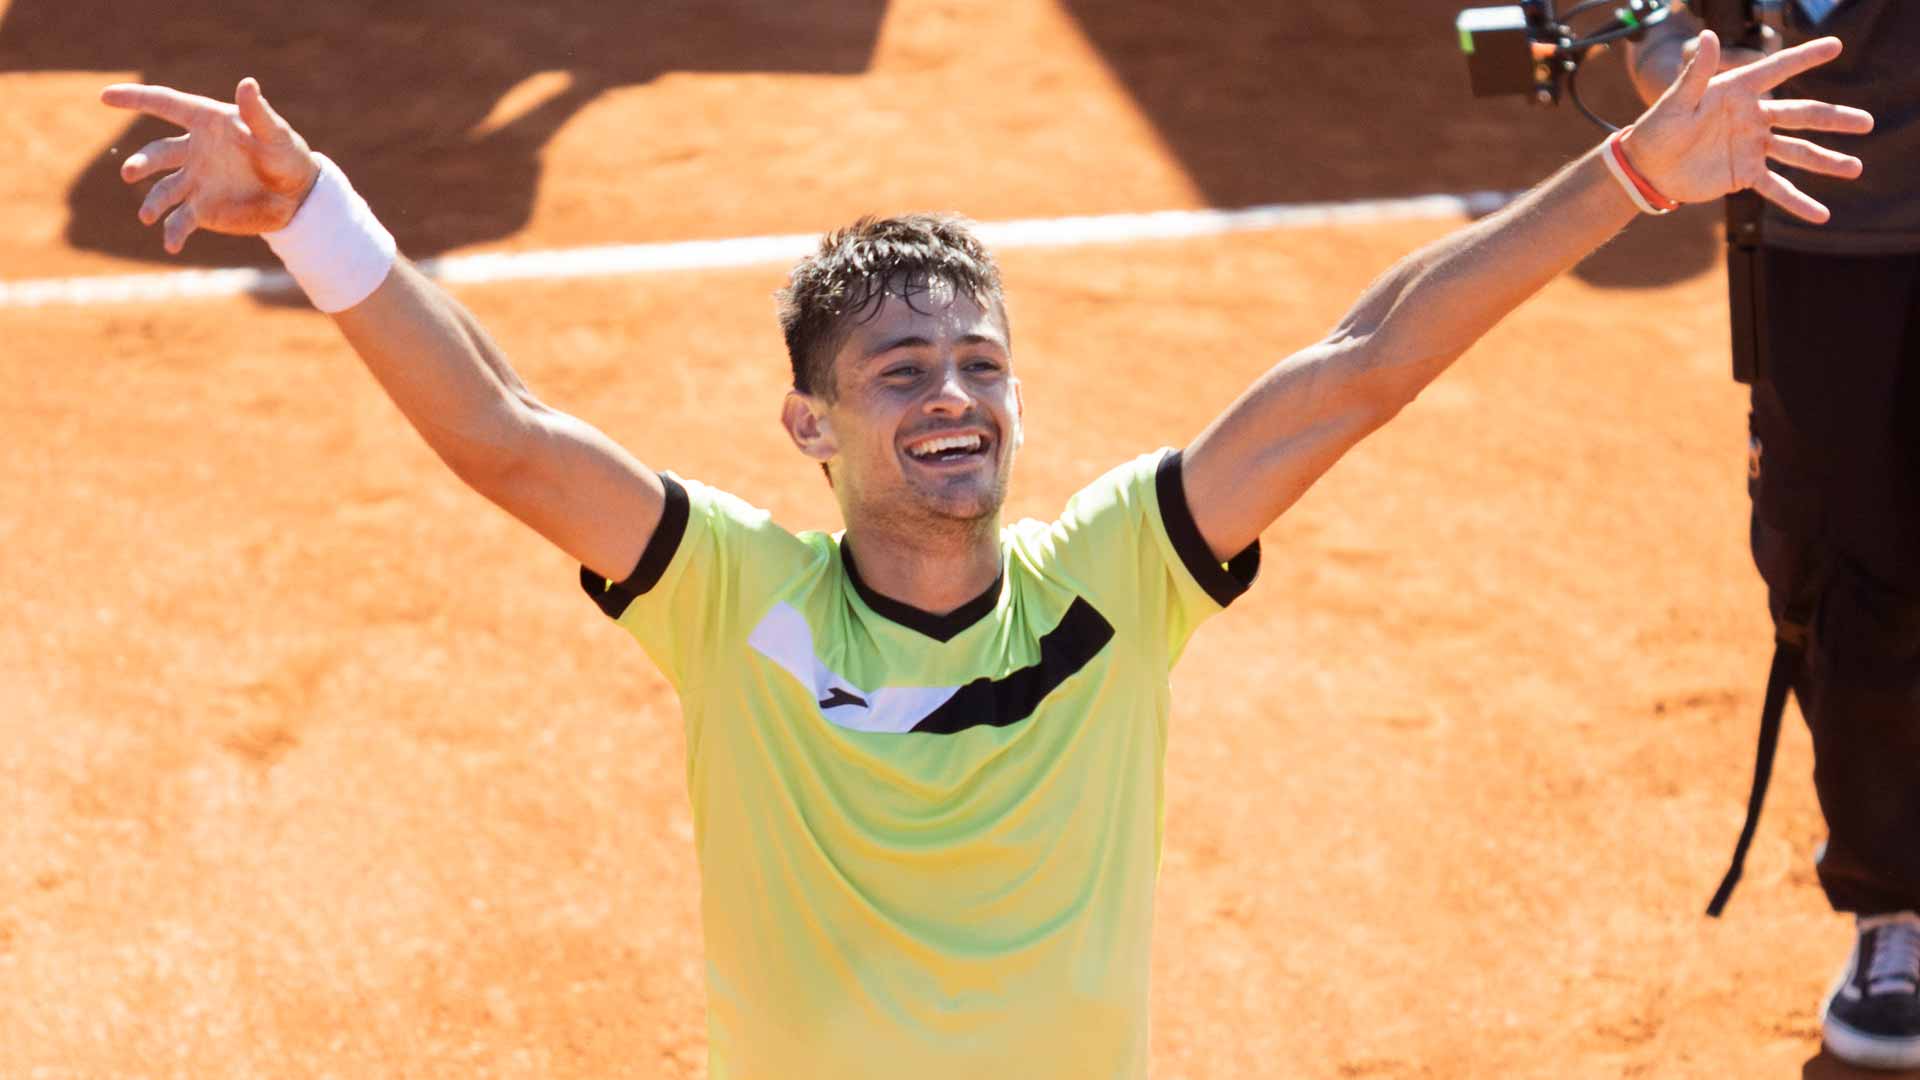 Mariano Navone wins the Challenger 100 event in Buenos Aires, Argentina.